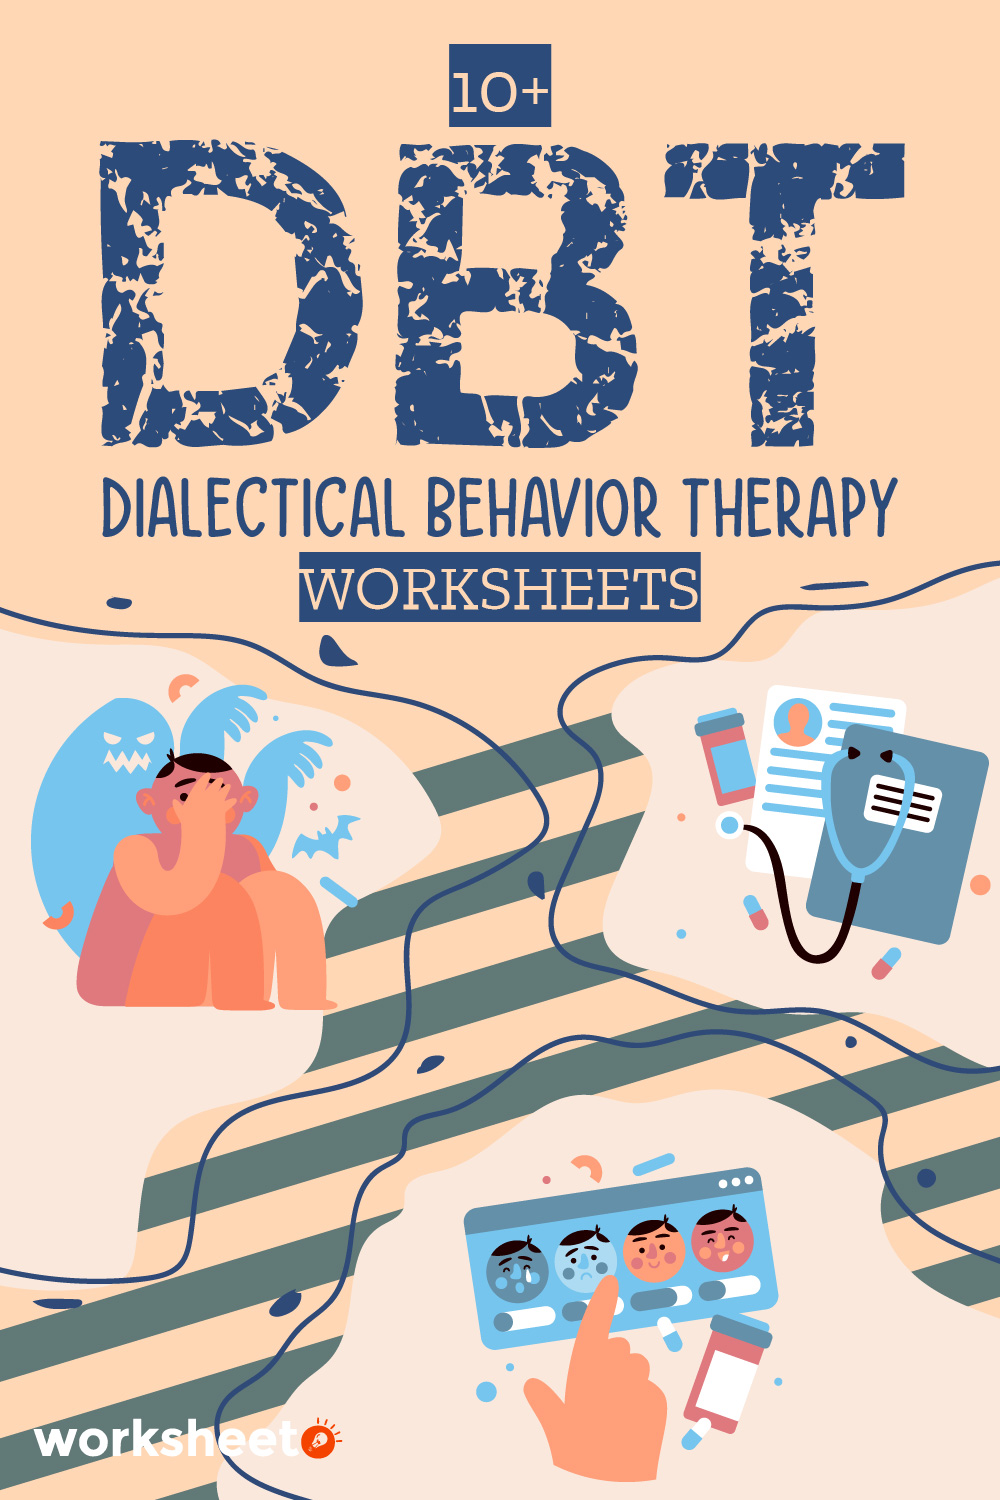 16 Images of DBT Dialectical Behavior Therapy Worksheets